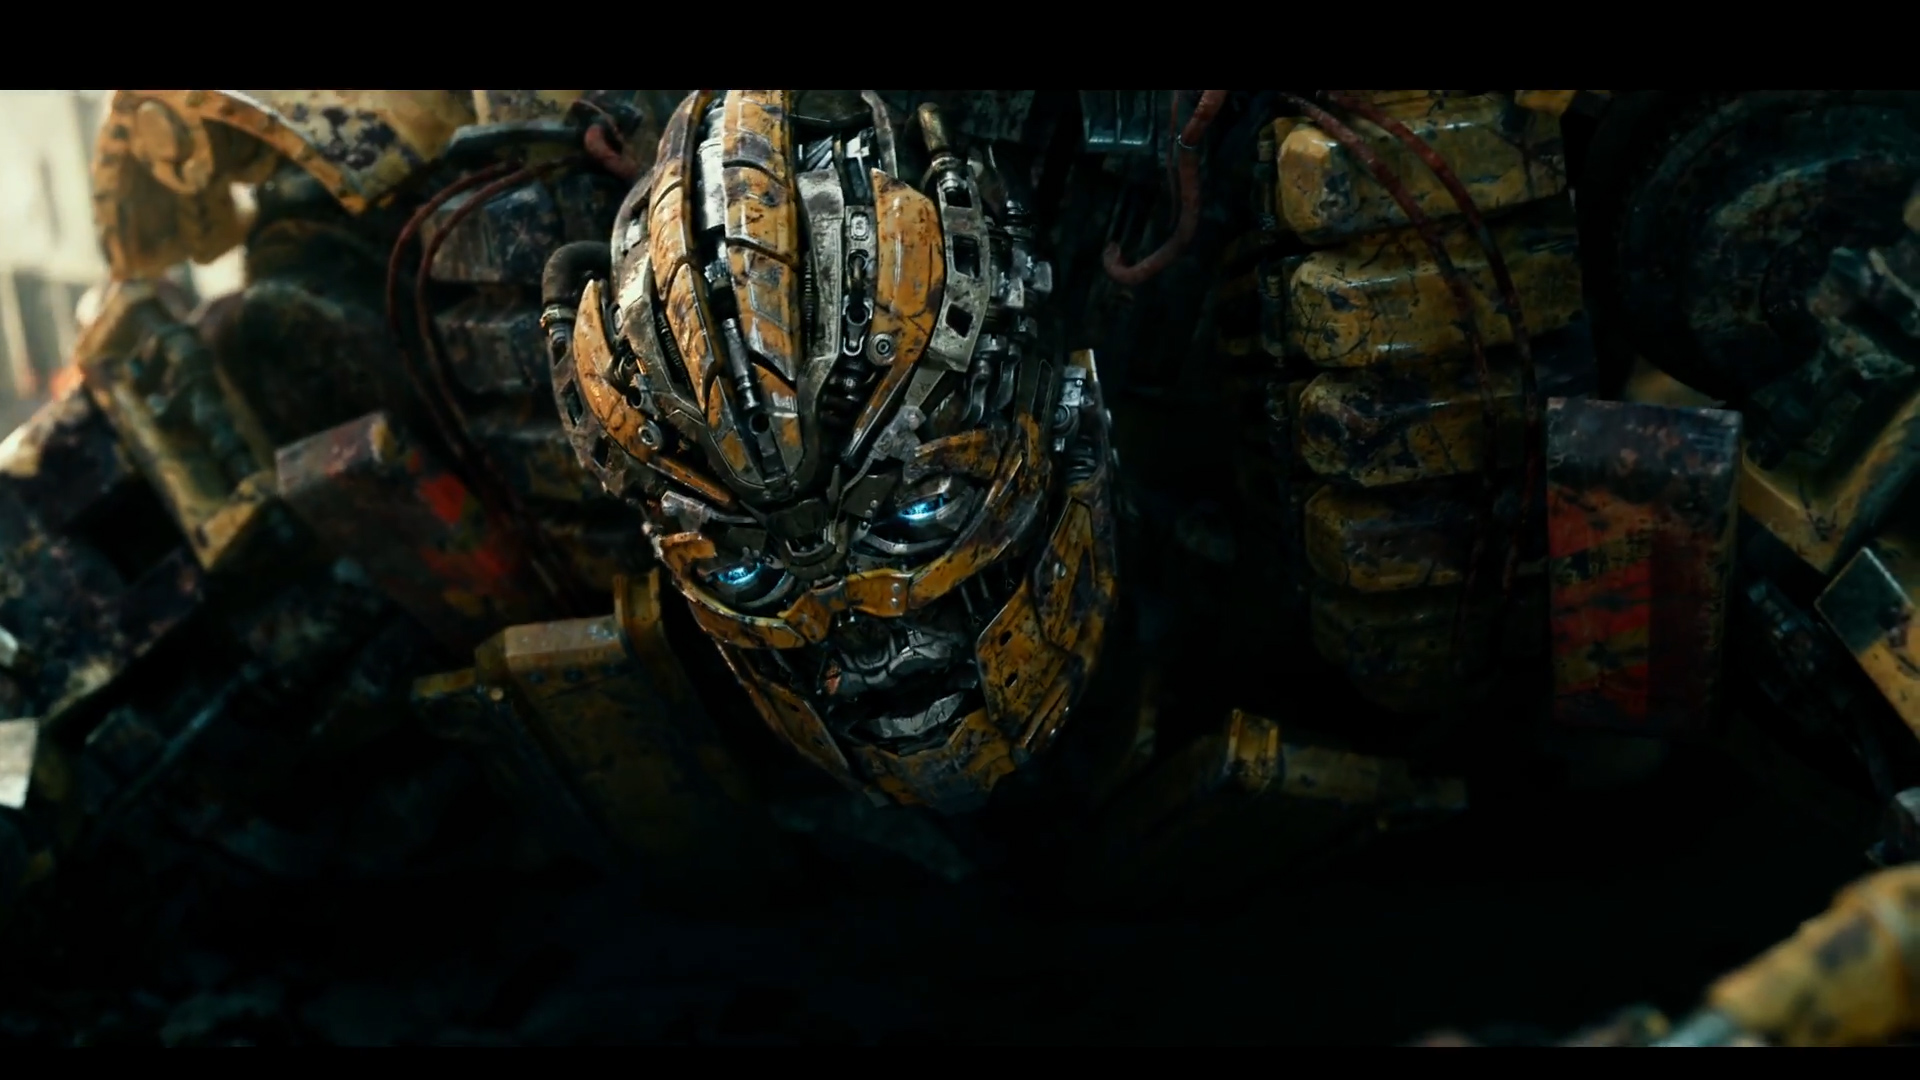 The Latest Movie Transformer Is A Literal Pile Of Garbage